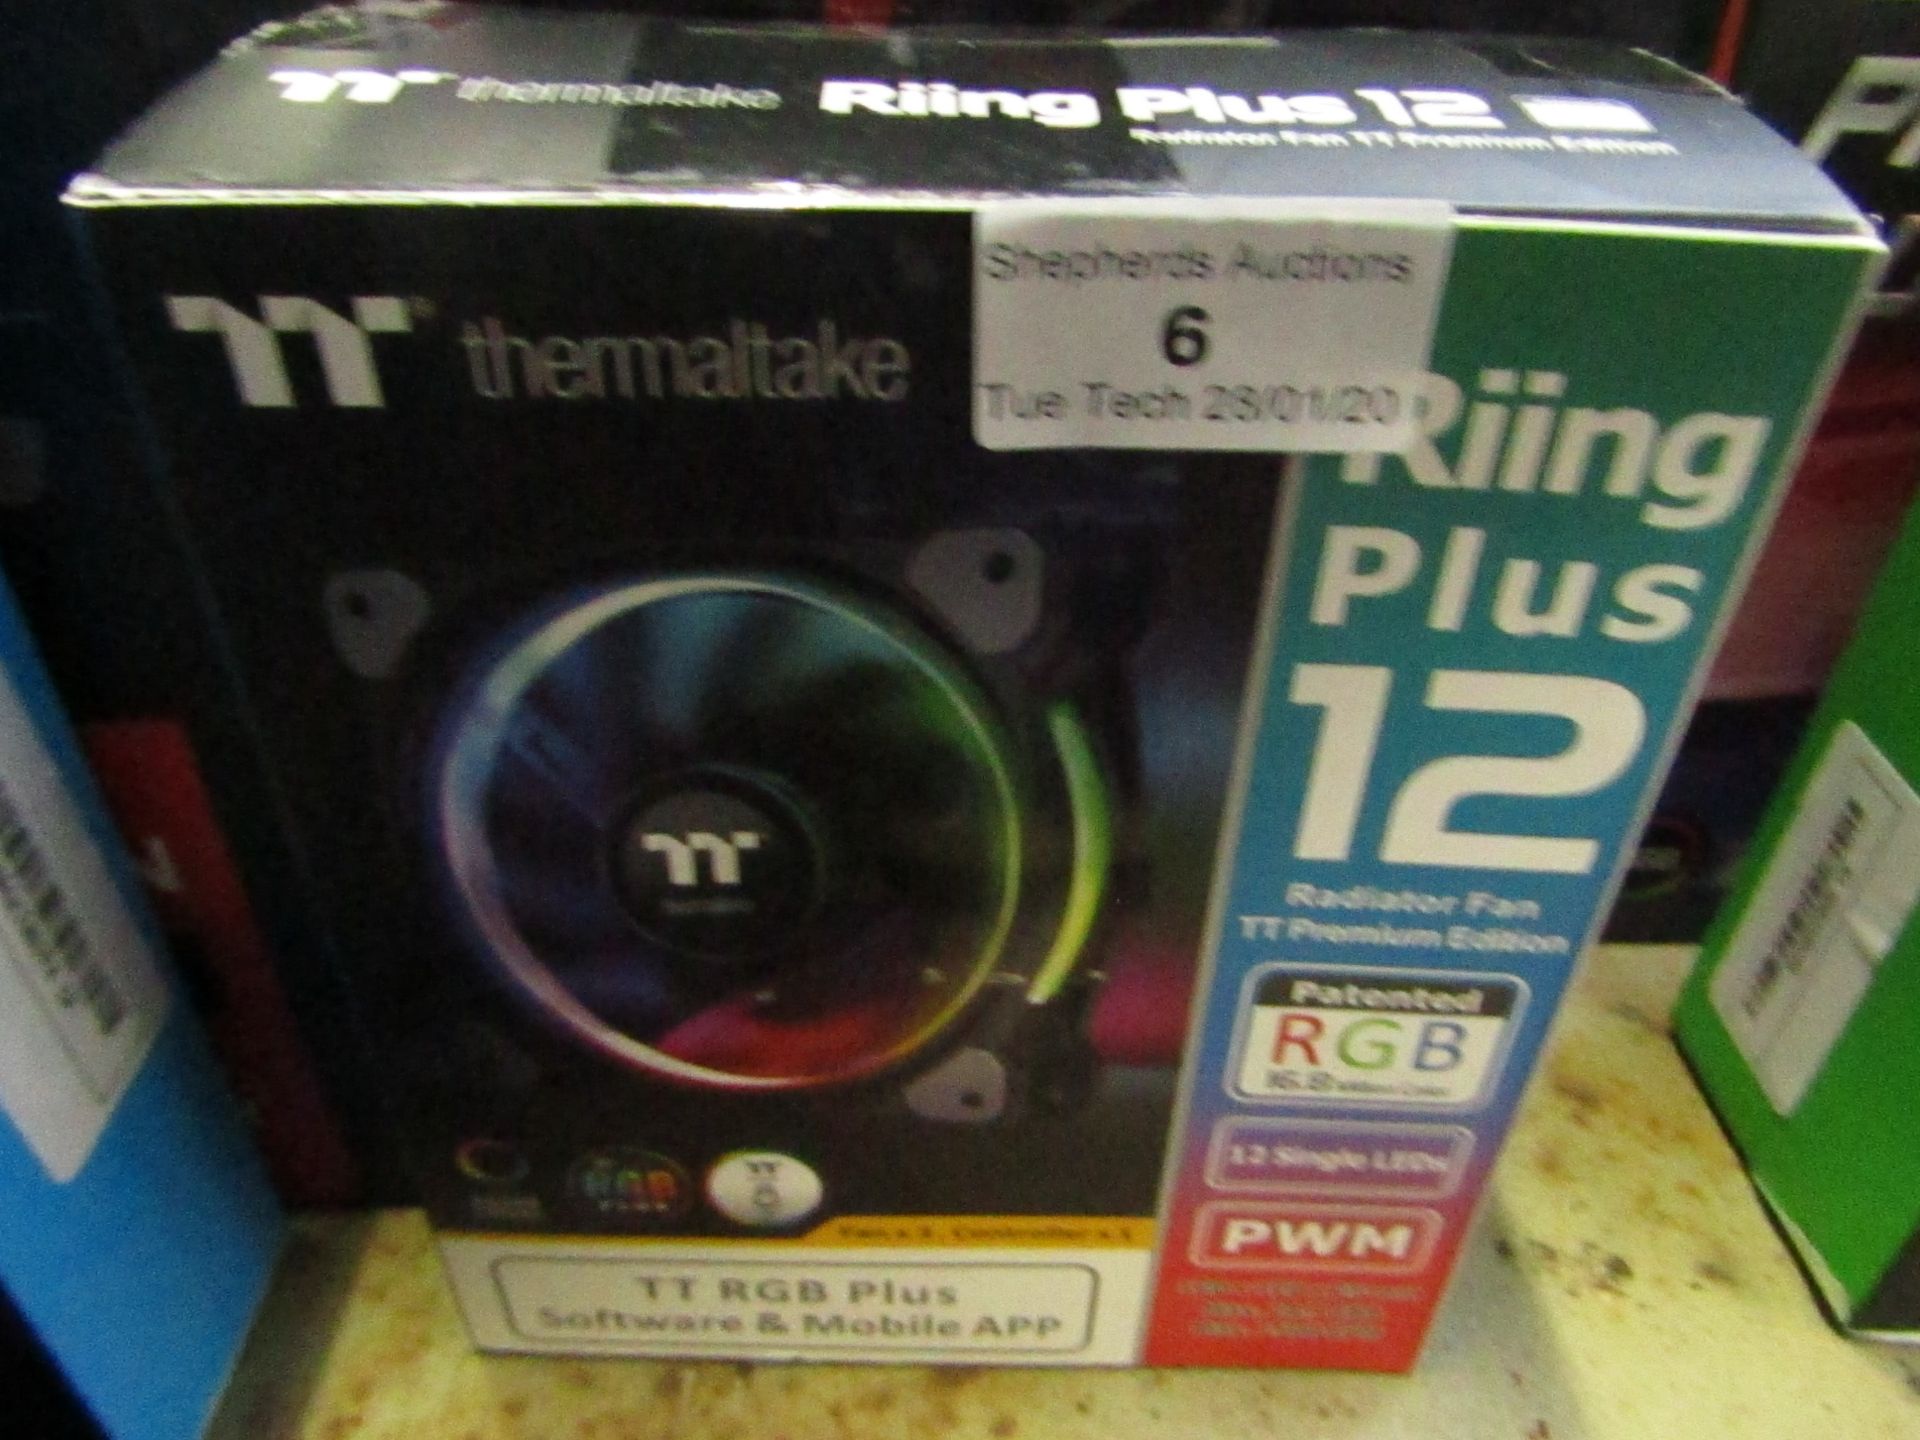 Thermaltake Riing Plus 12 radiator fan, untested and boxed. RRP £116.00